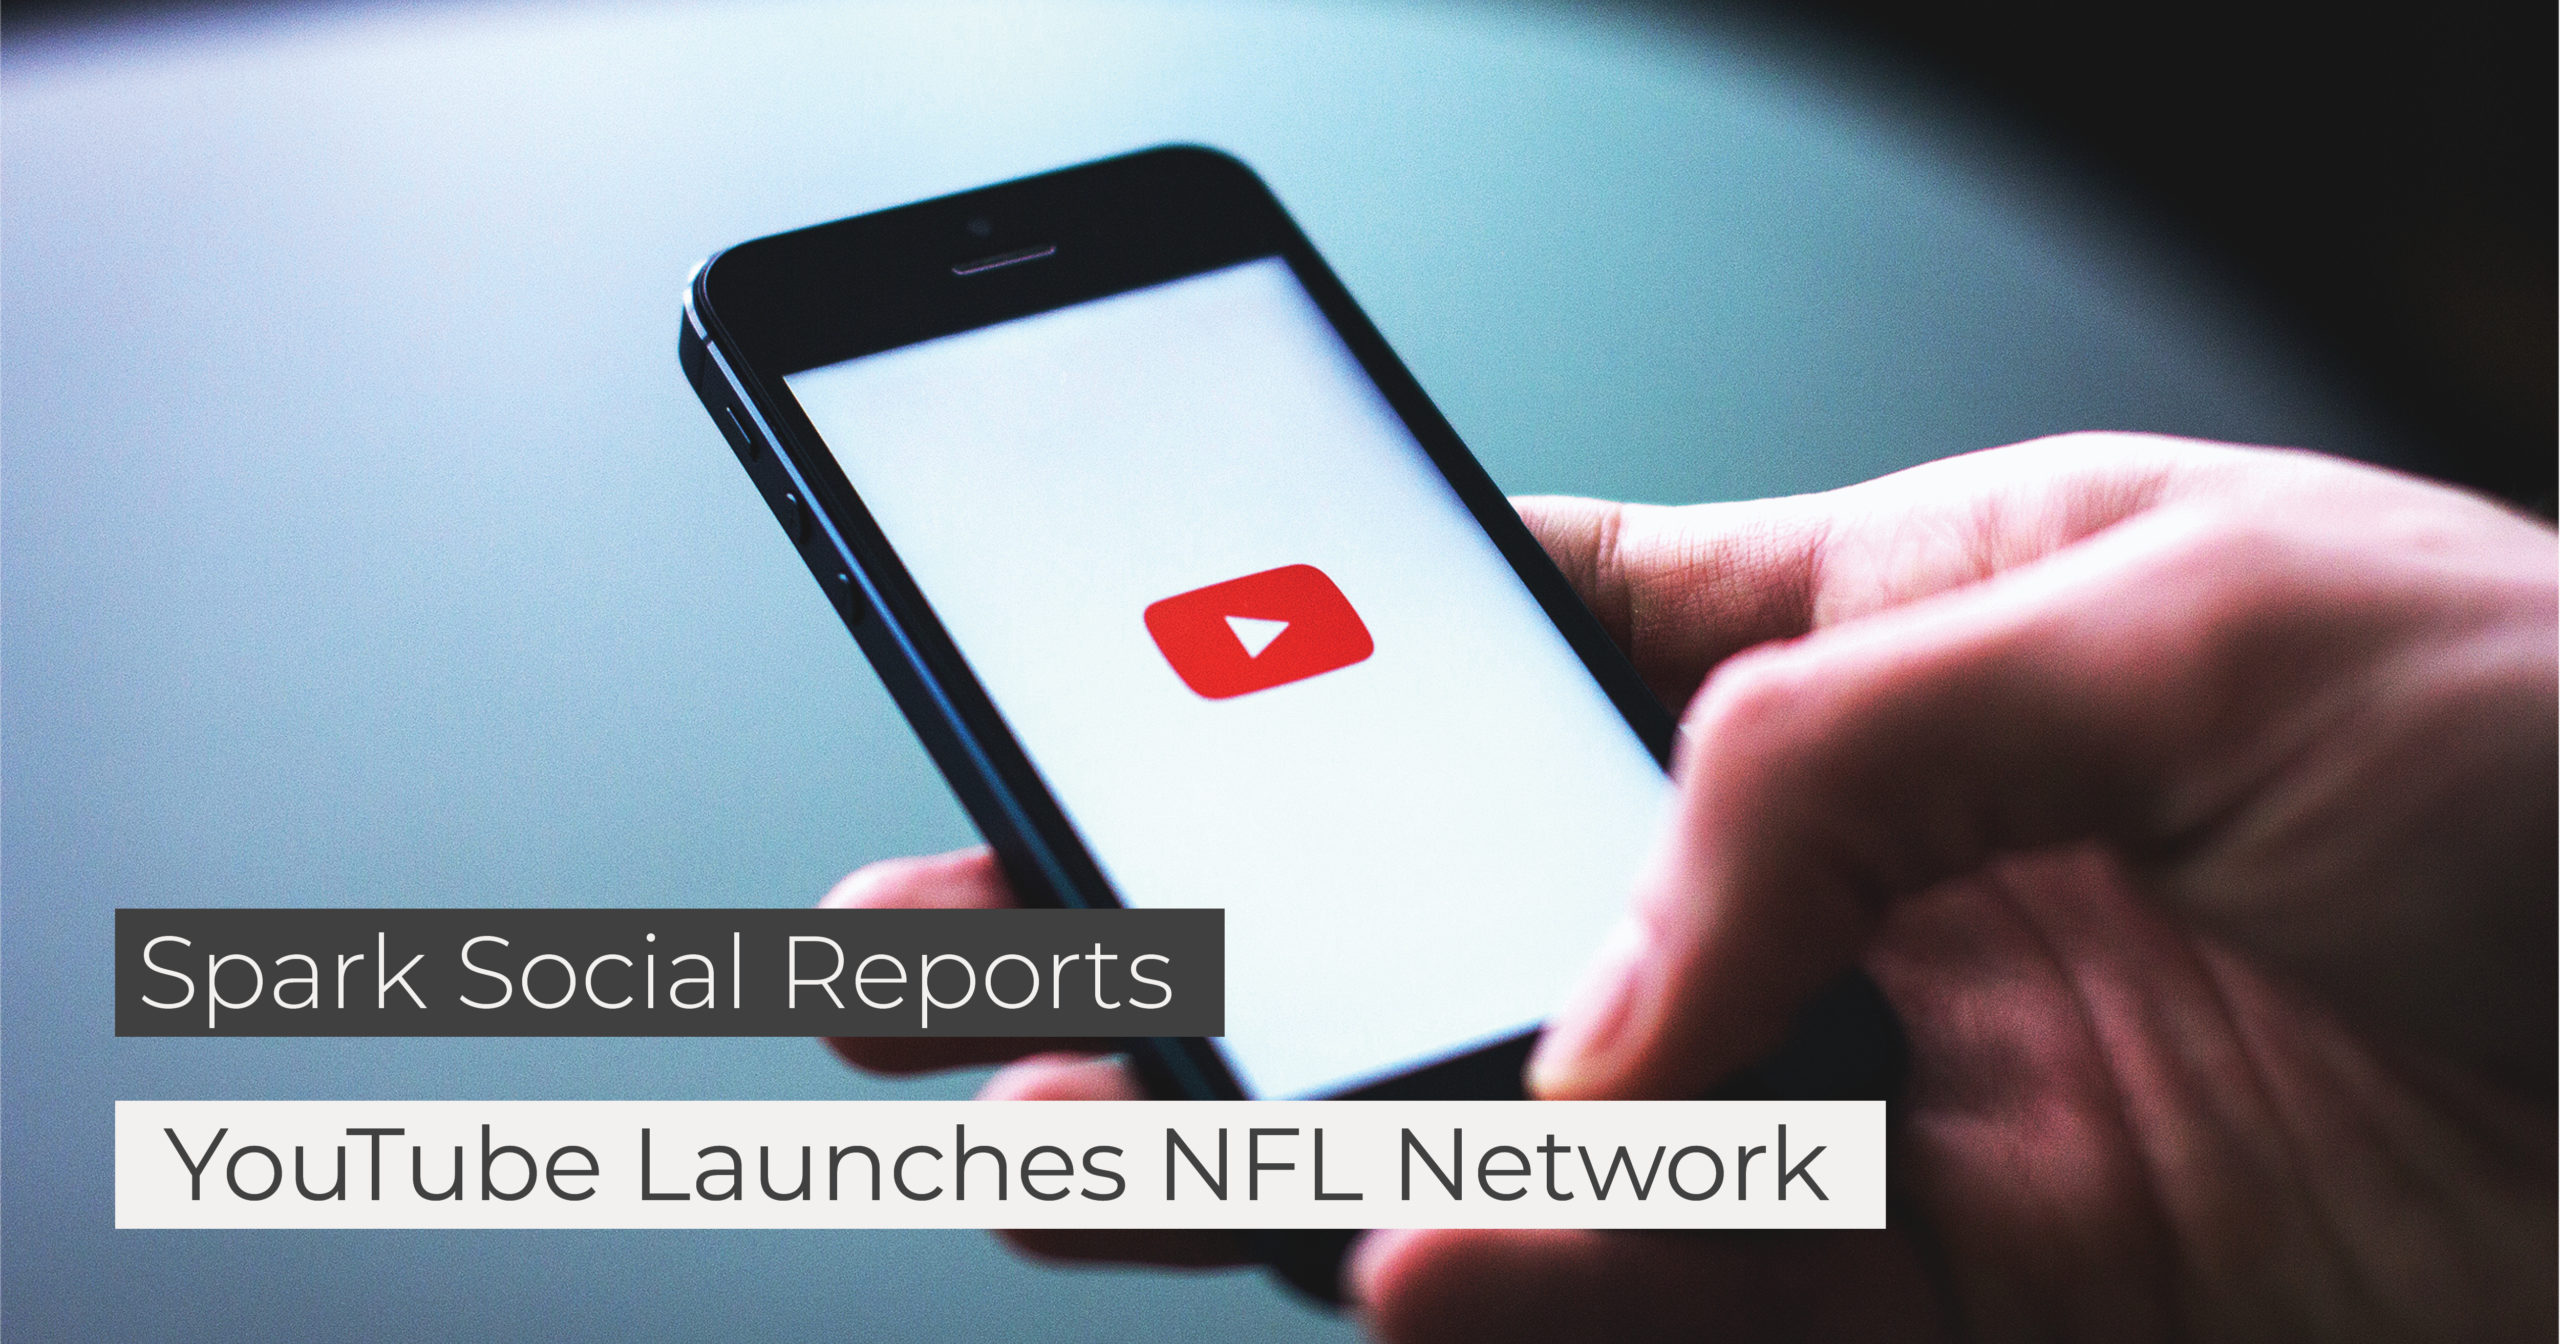 YouTube Launches NFL Network